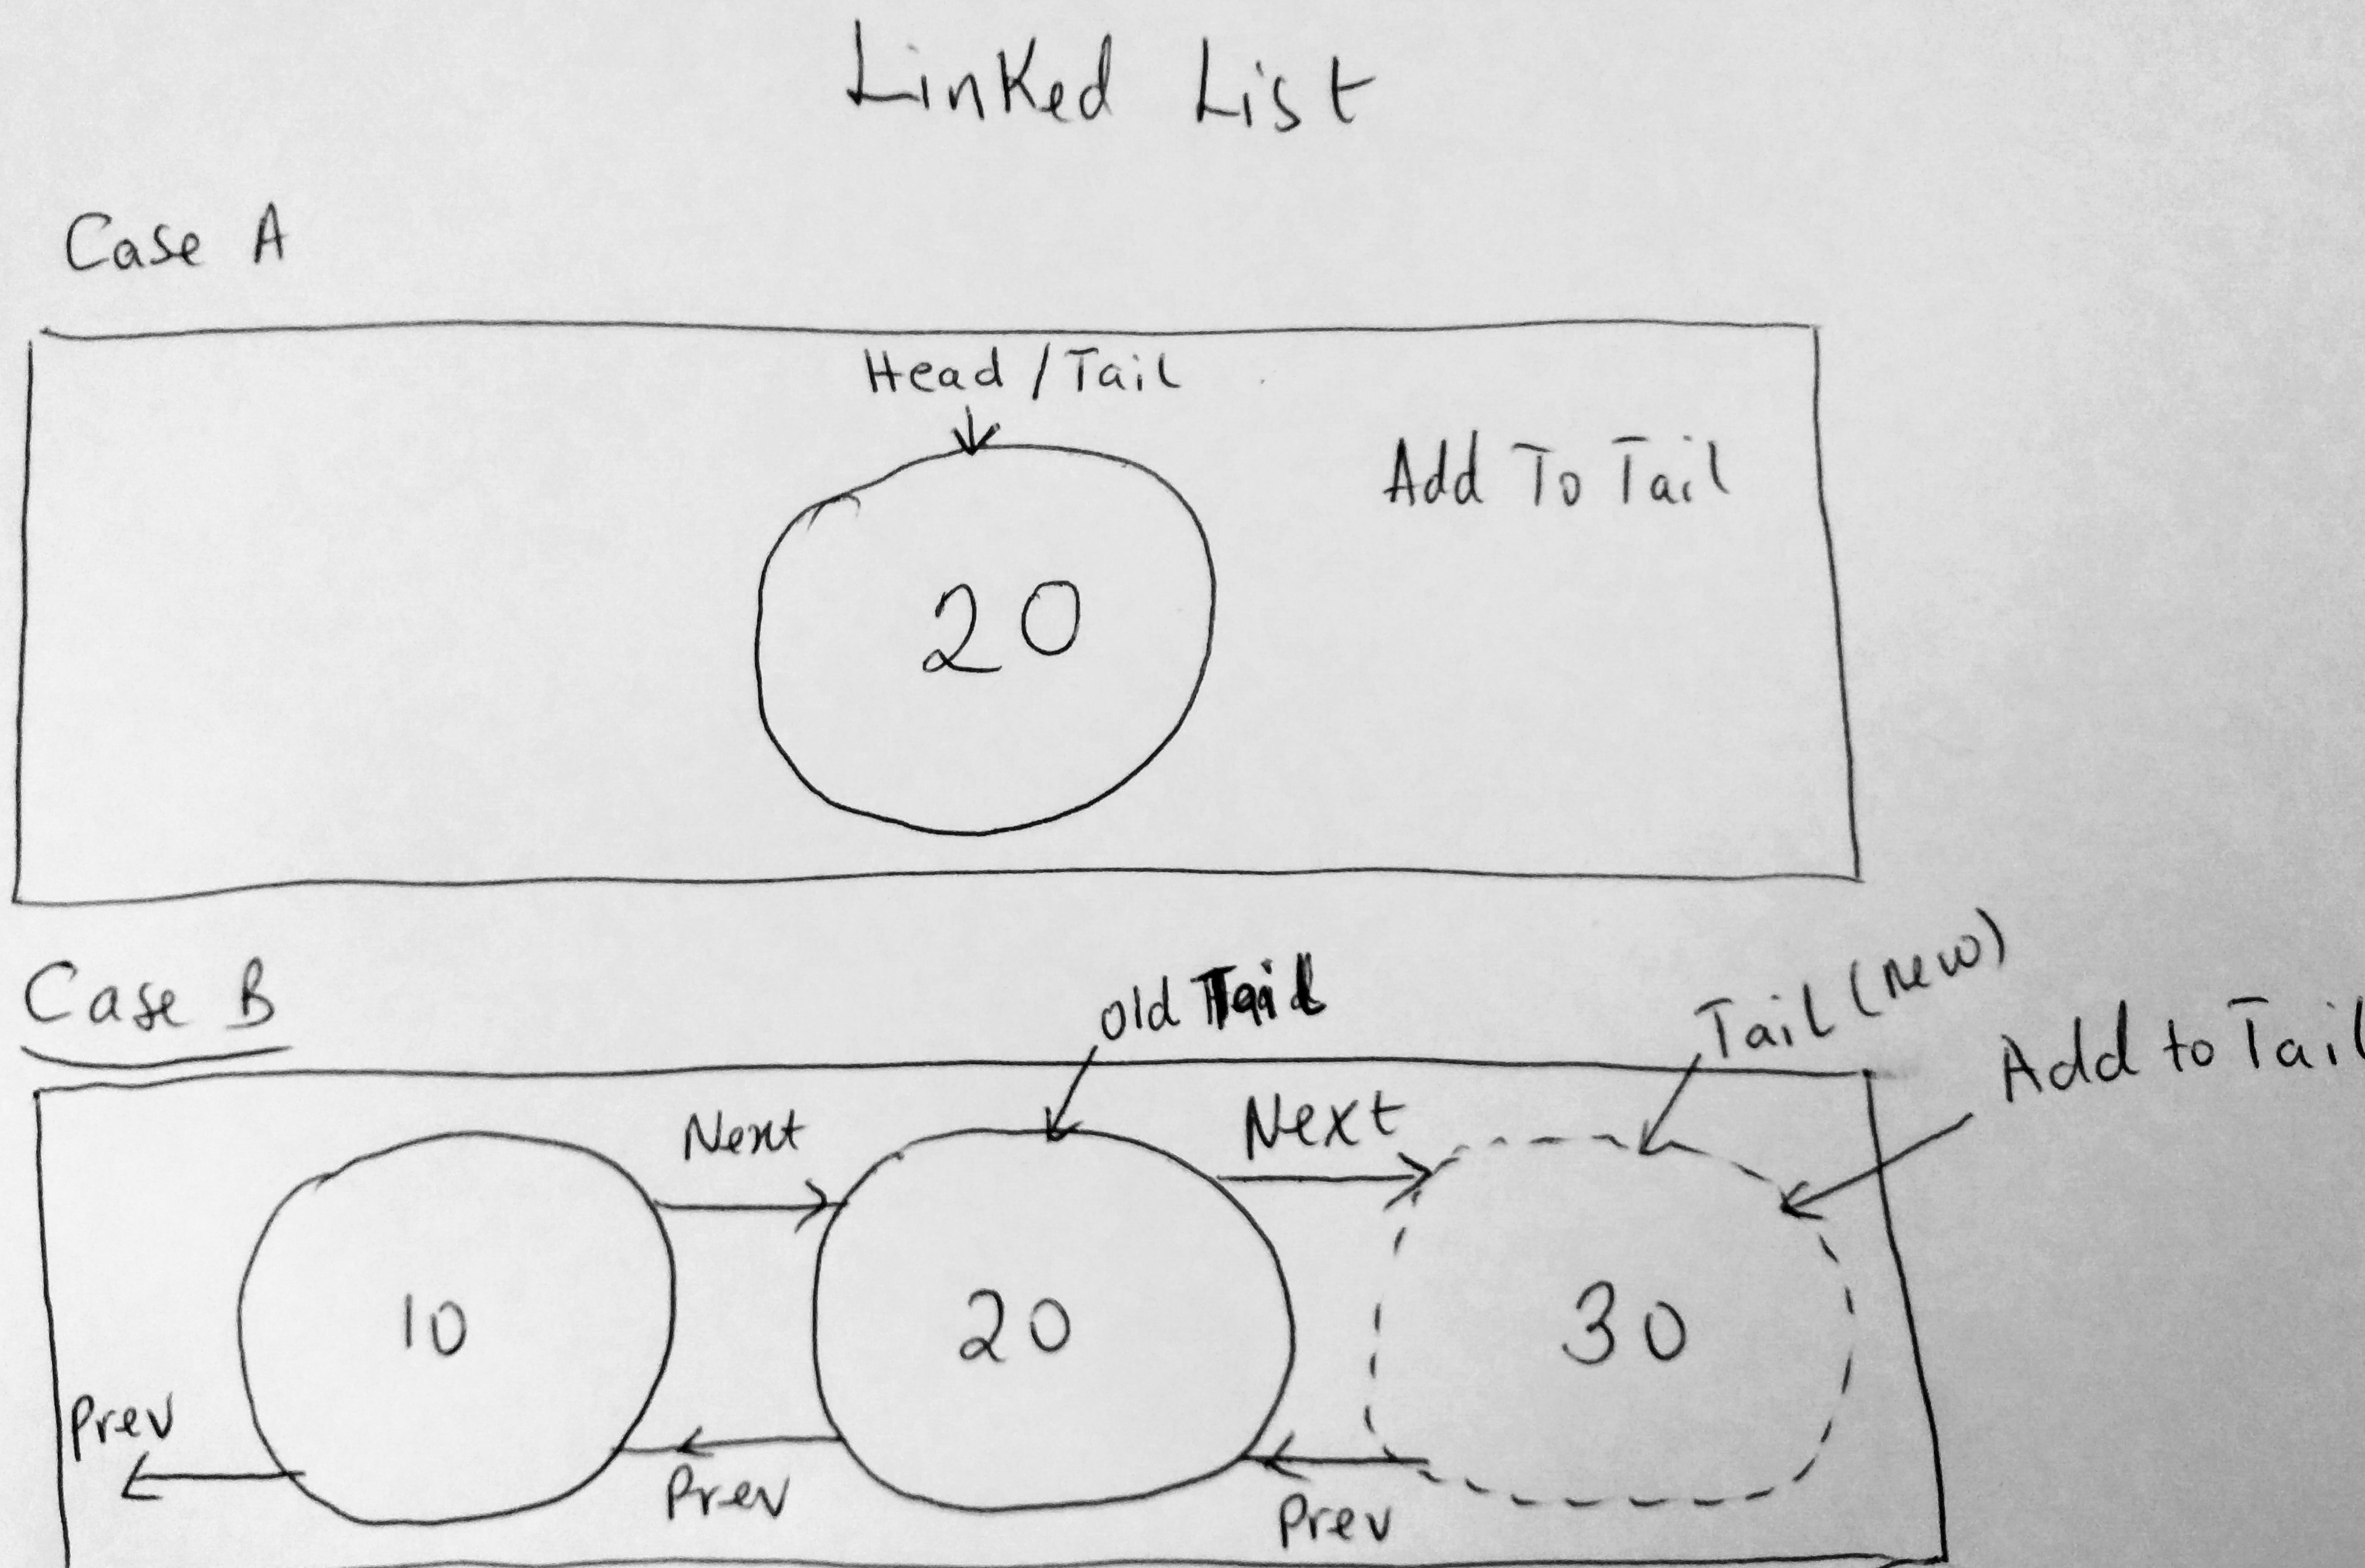 doubly linked list - add to tail